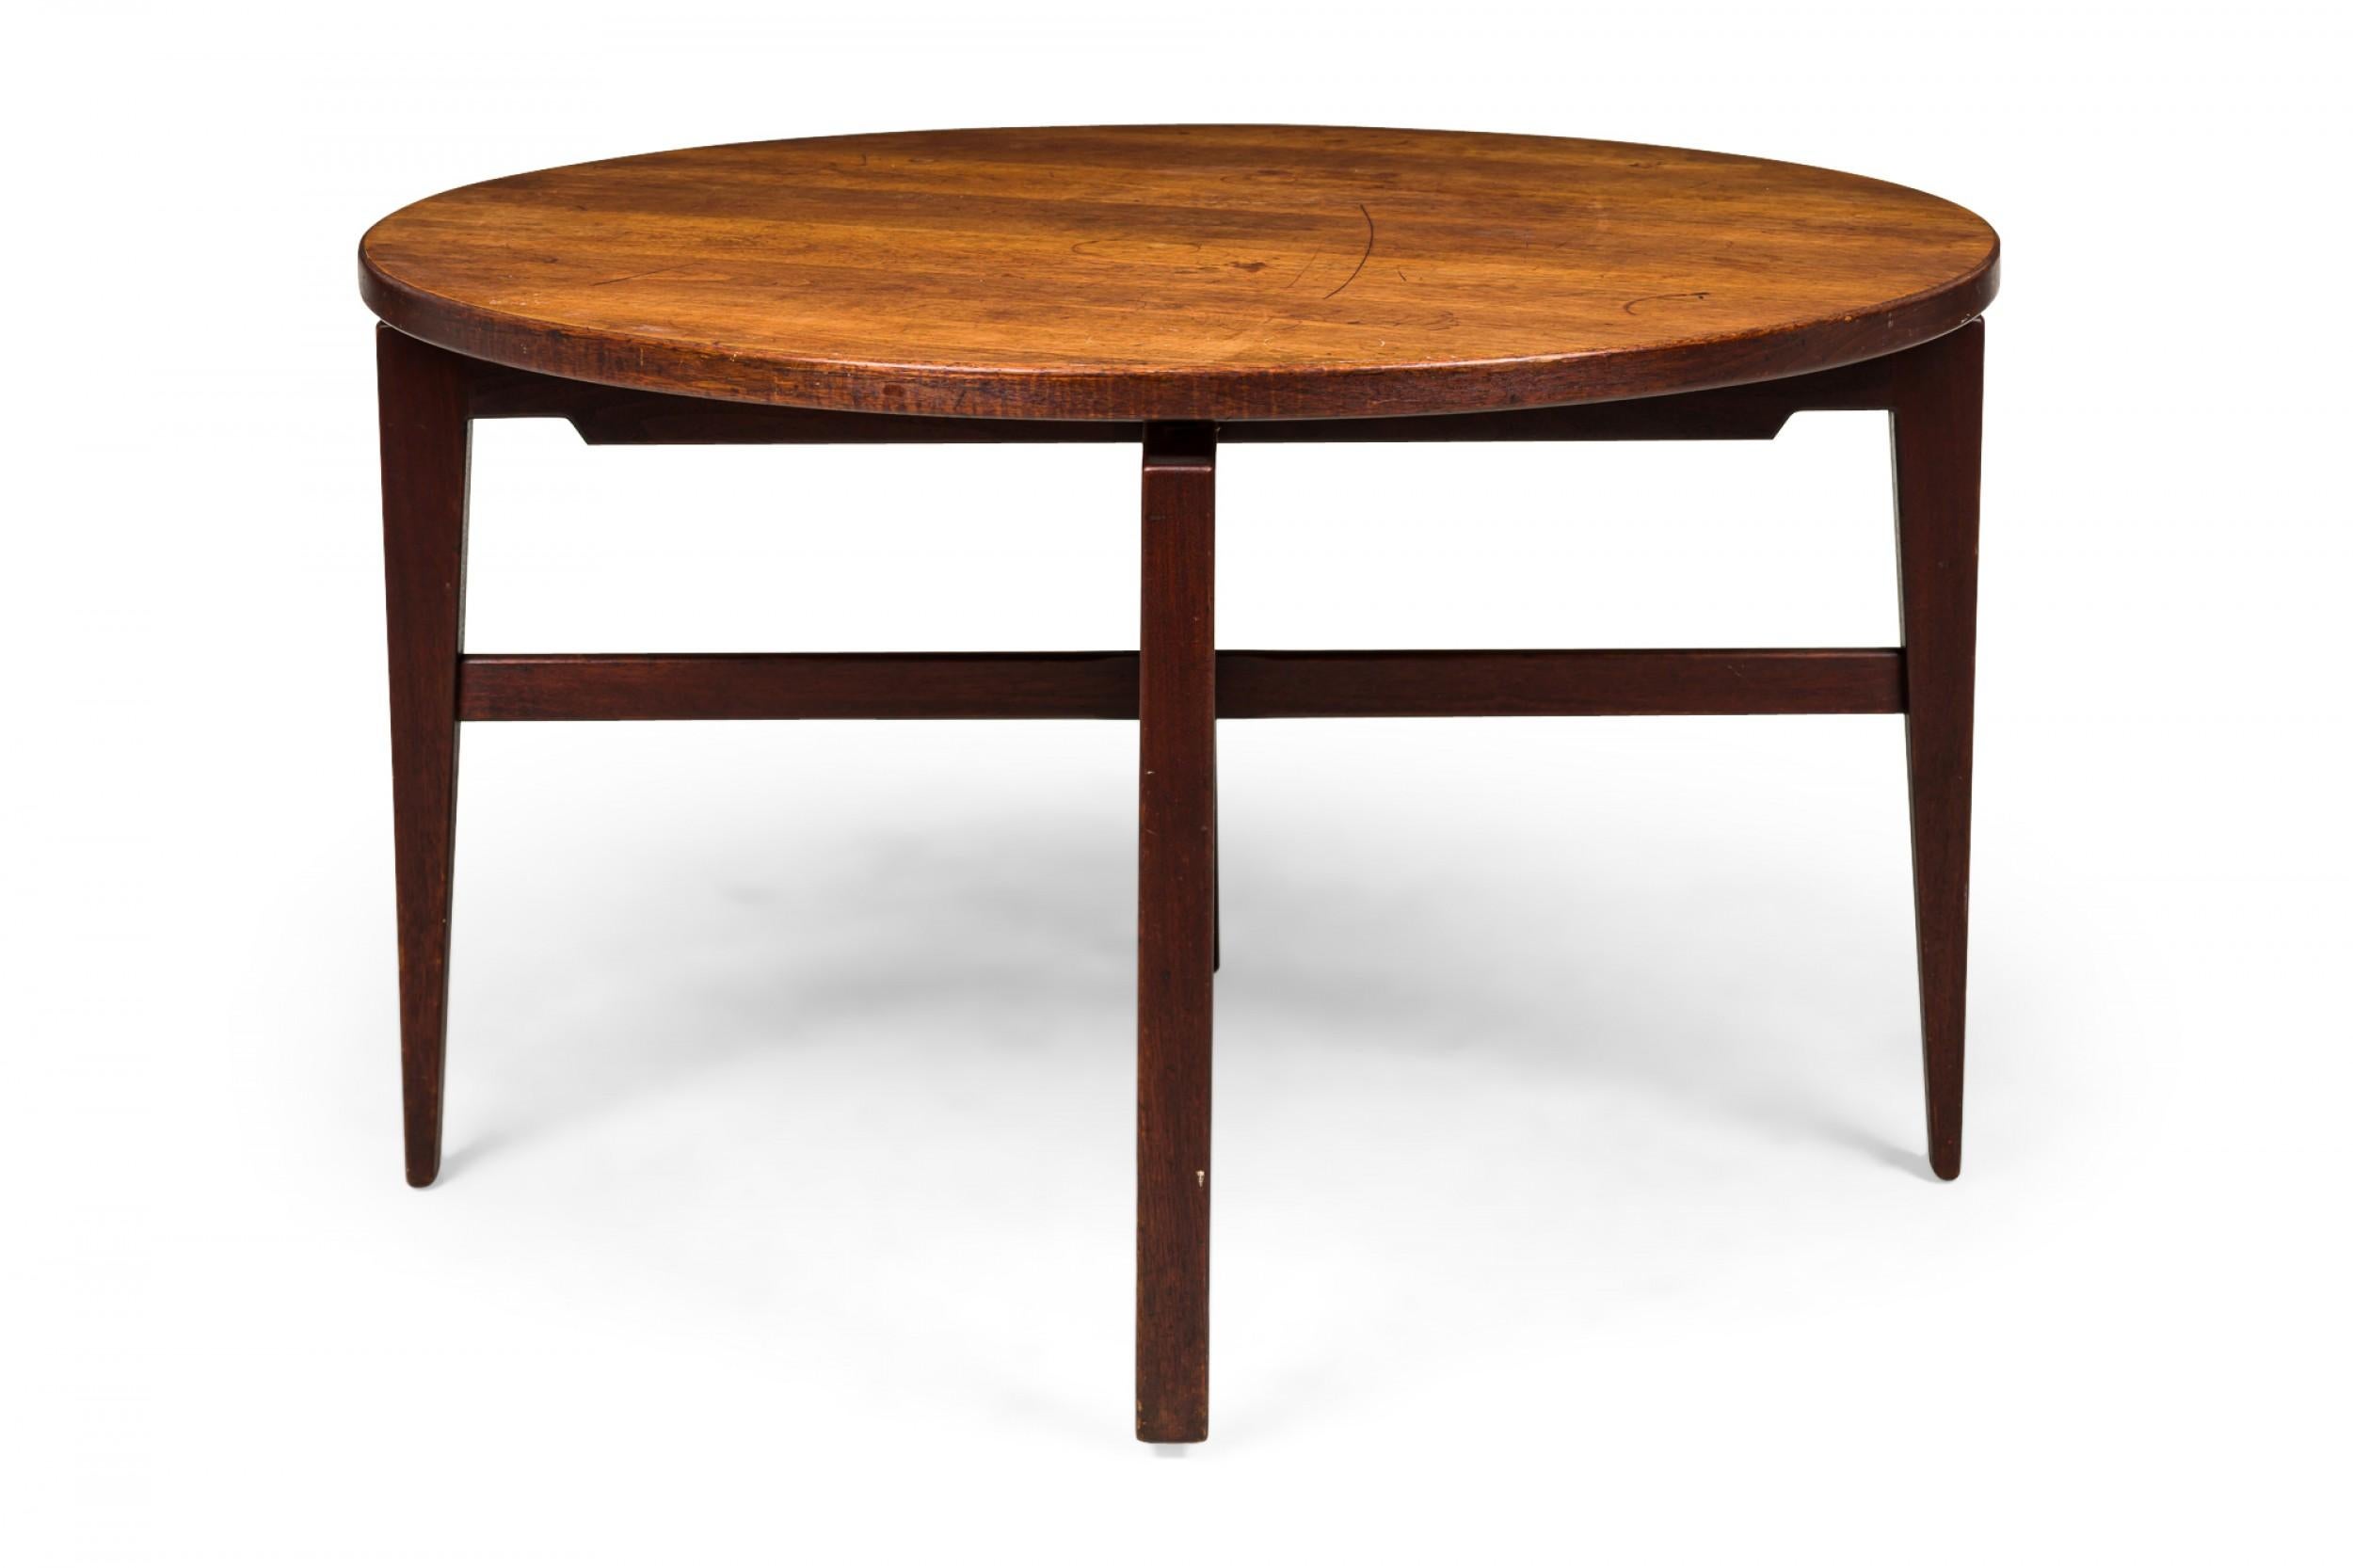 Danish Mid-Century circular walnut dining table with a rotating lazy susan top resting on an X-shaped walnut base with tapered square legs. (JENS RISOM)(Similar tables: DUF0276, DUF0278, DUF0279)
